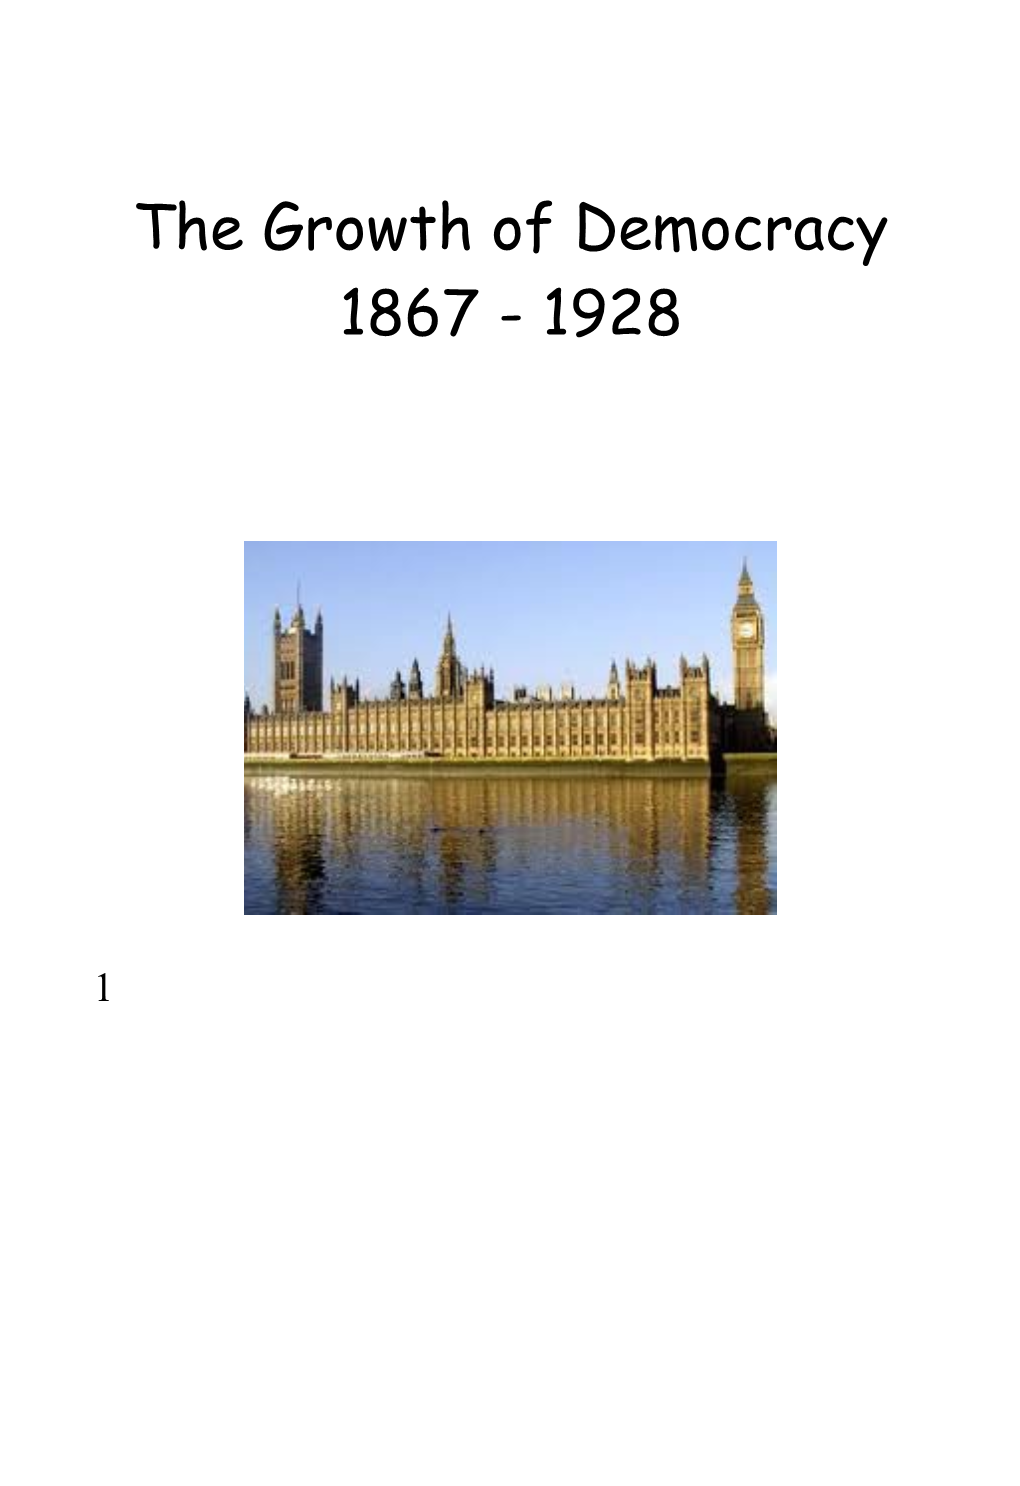 The Growth of Democracy 1832 1928